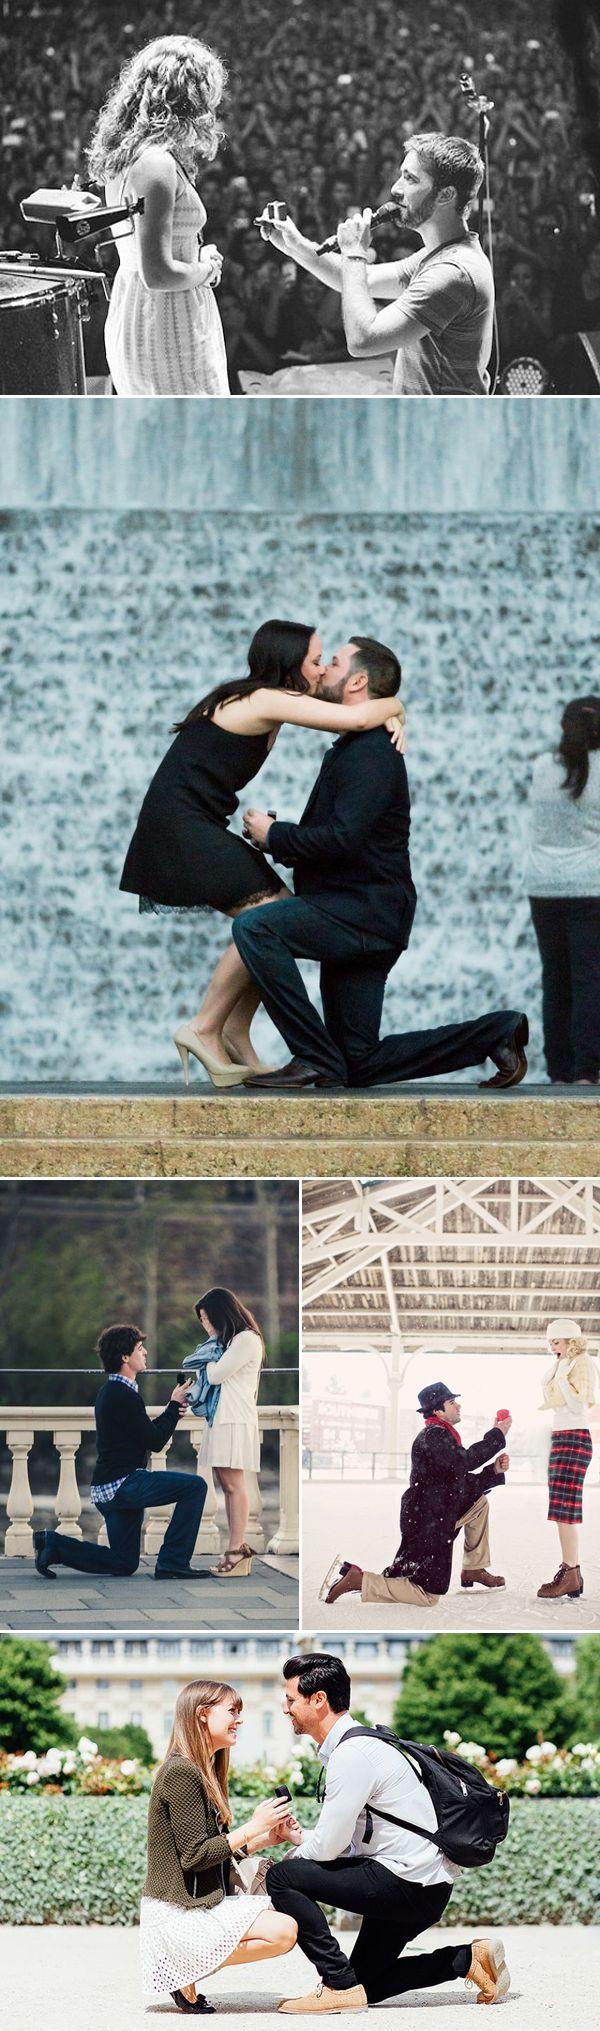 Wedding - 25 Seriously Romantic Proposal Locations & Ideas